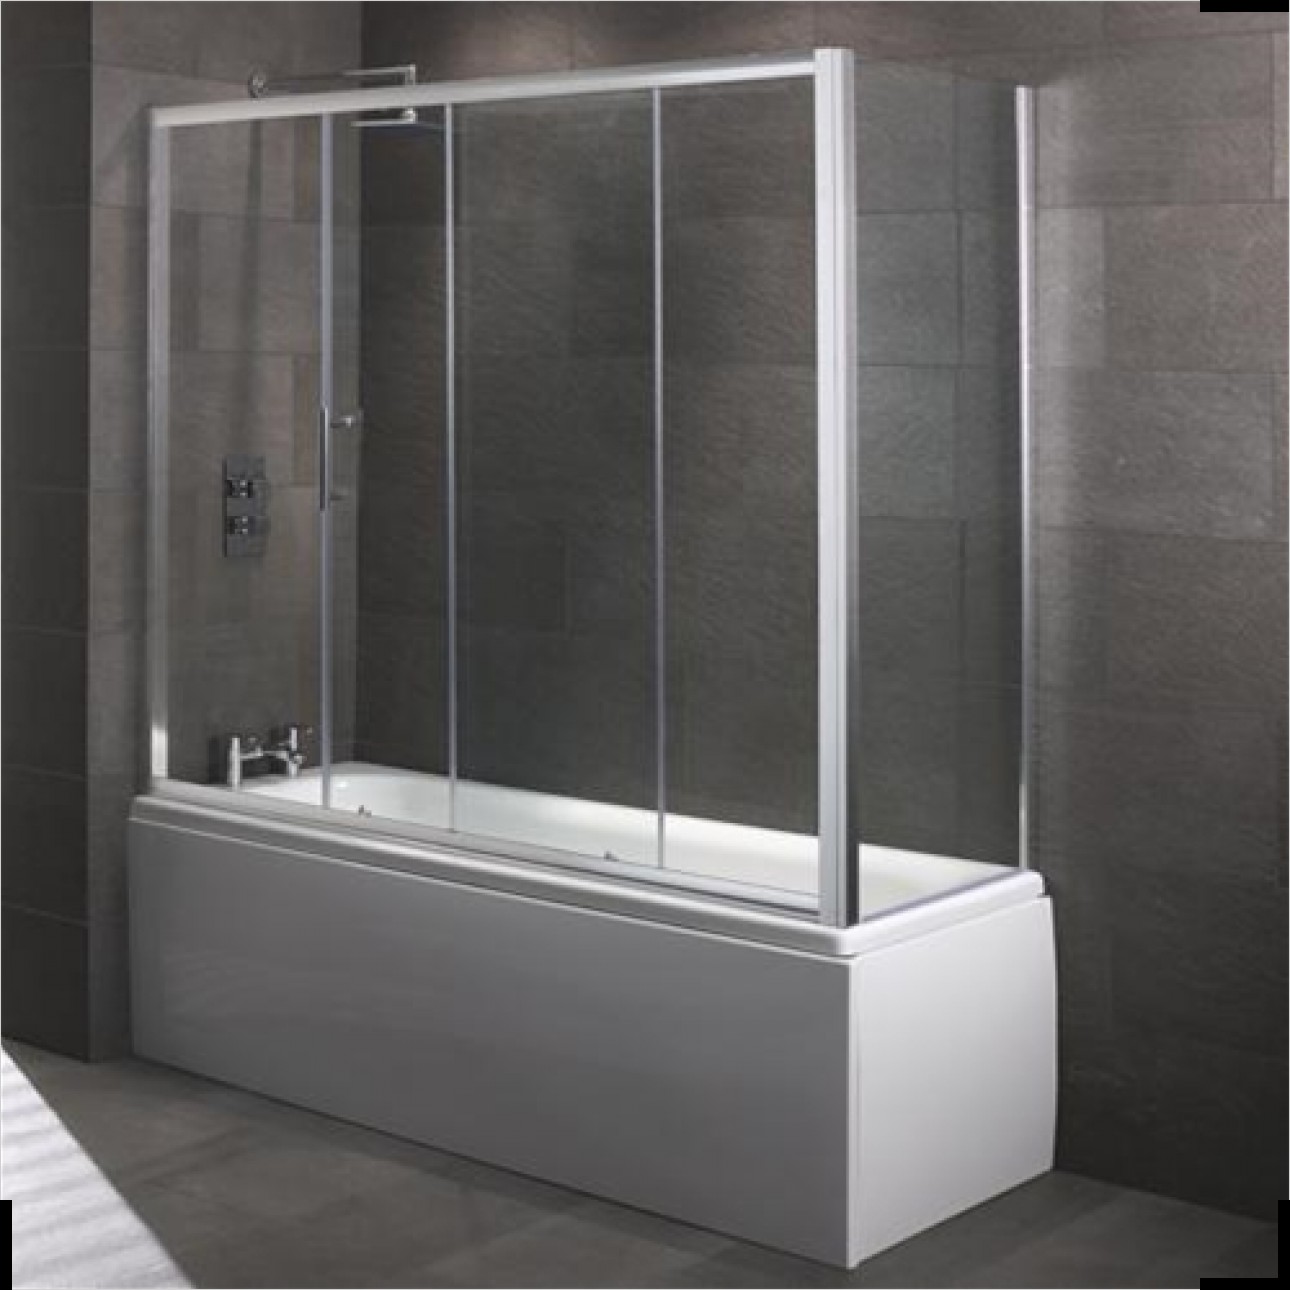 Enclose Your Bath Completely With A Sliding Door Bath Screen